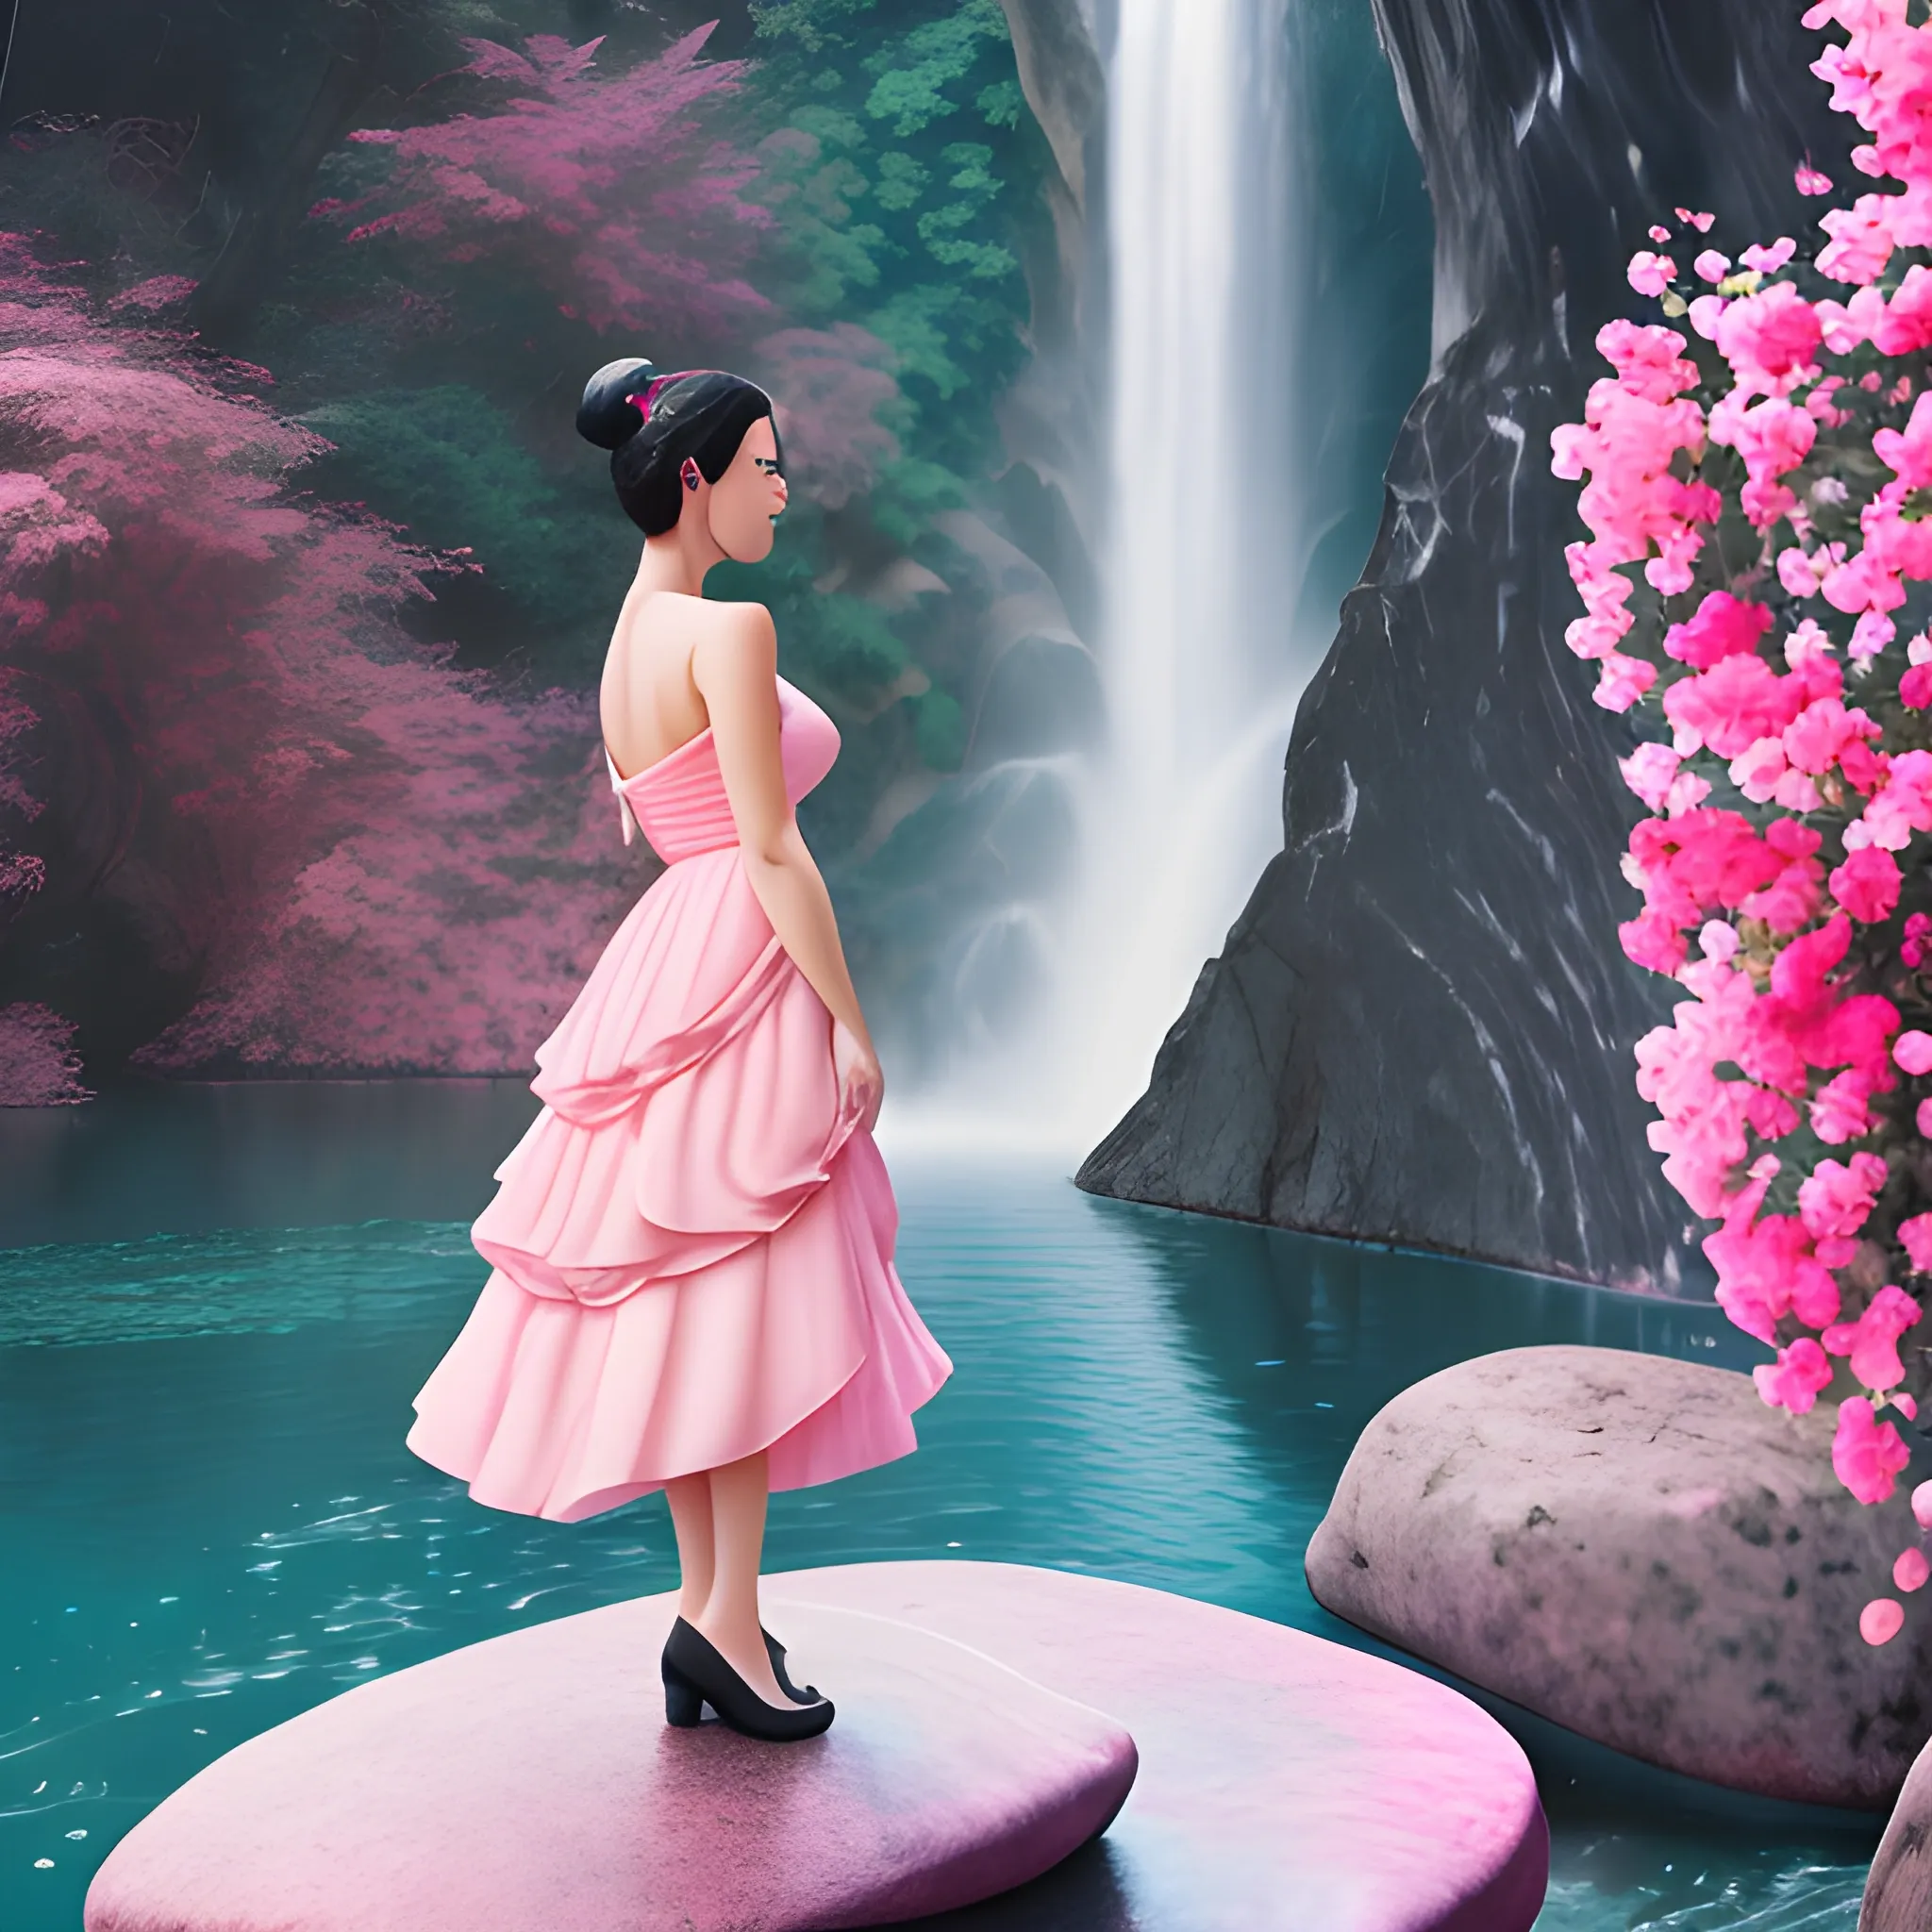 Very beautiful woman, black hair, bun hair, standing on stone, pink roses, light blue and pink, romanticism, high detail, 8K resolution, ultra high definition picture,  red dress,  waterfall background,